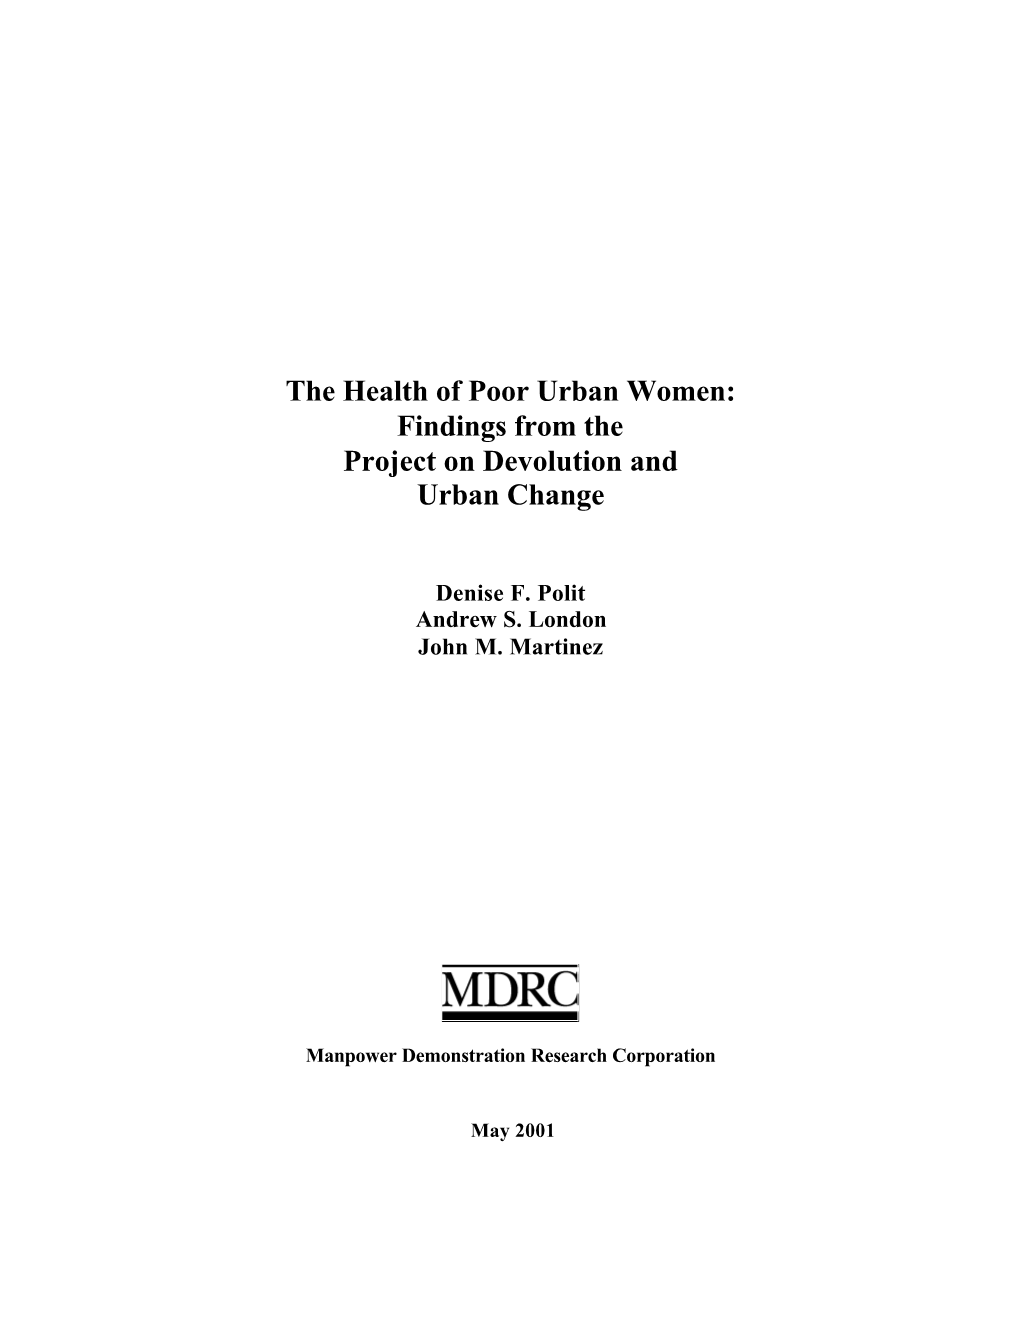 The Health of Poor Urban Women: Findings from the Project on Devolution and Urban Change